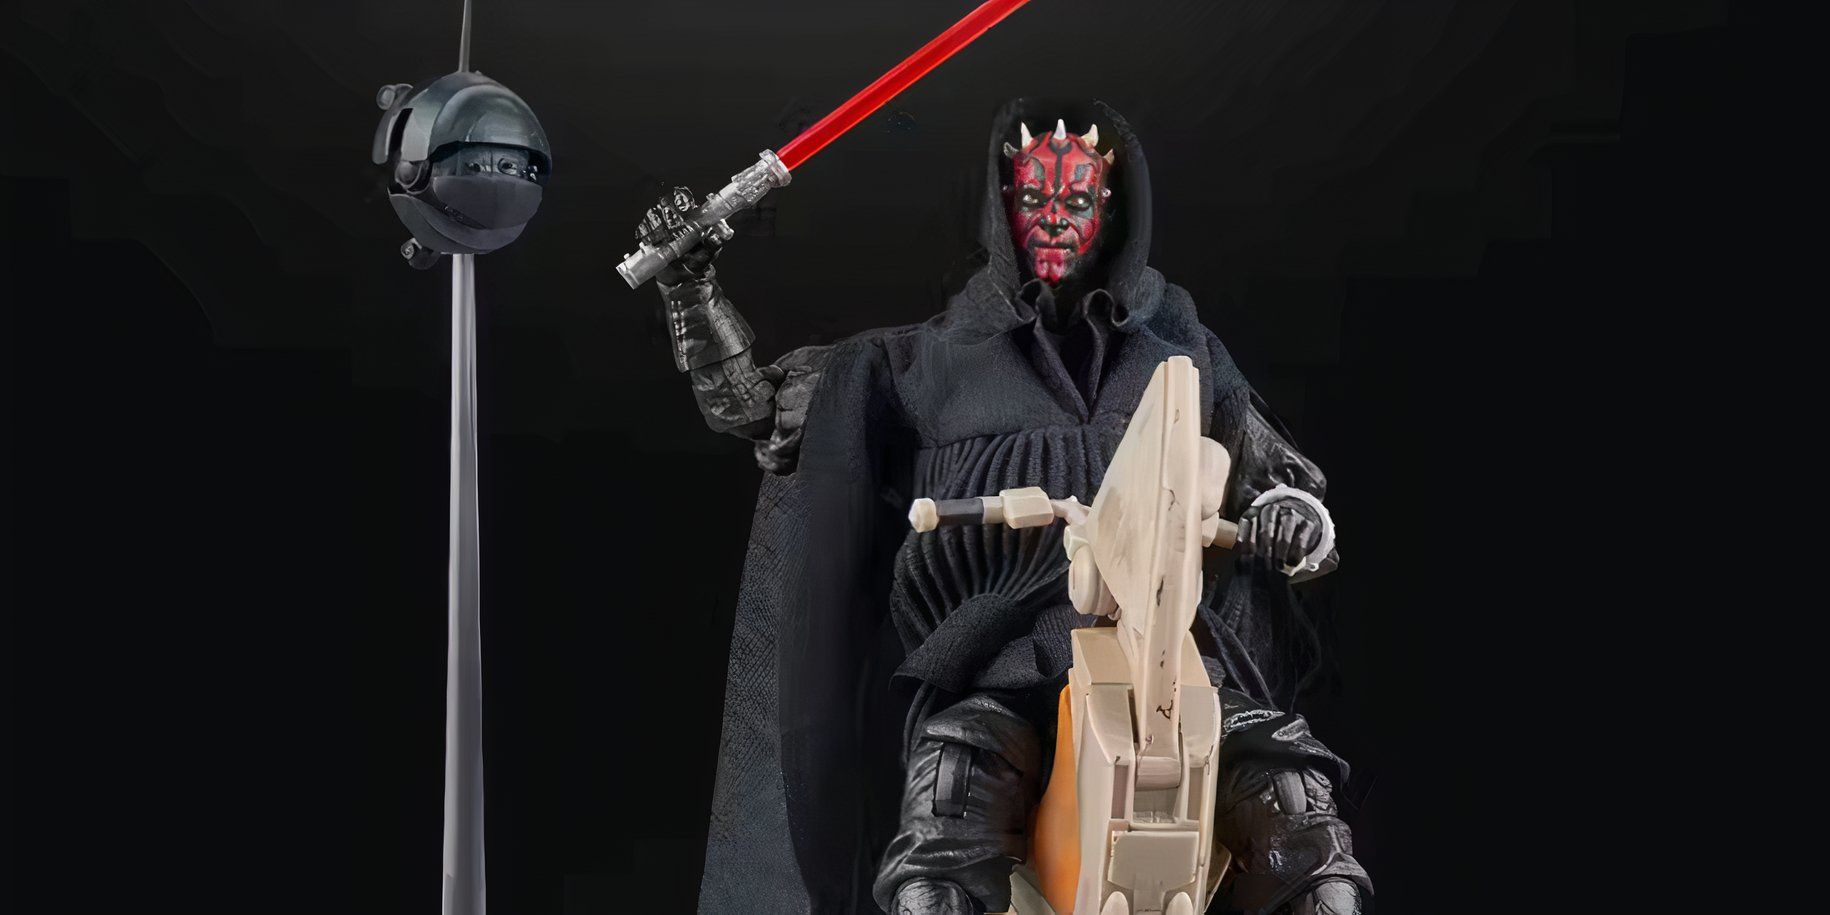 Star Wars’ Black Series SDCC Exclusive Is The Ultimate Darth Maul Action Figure